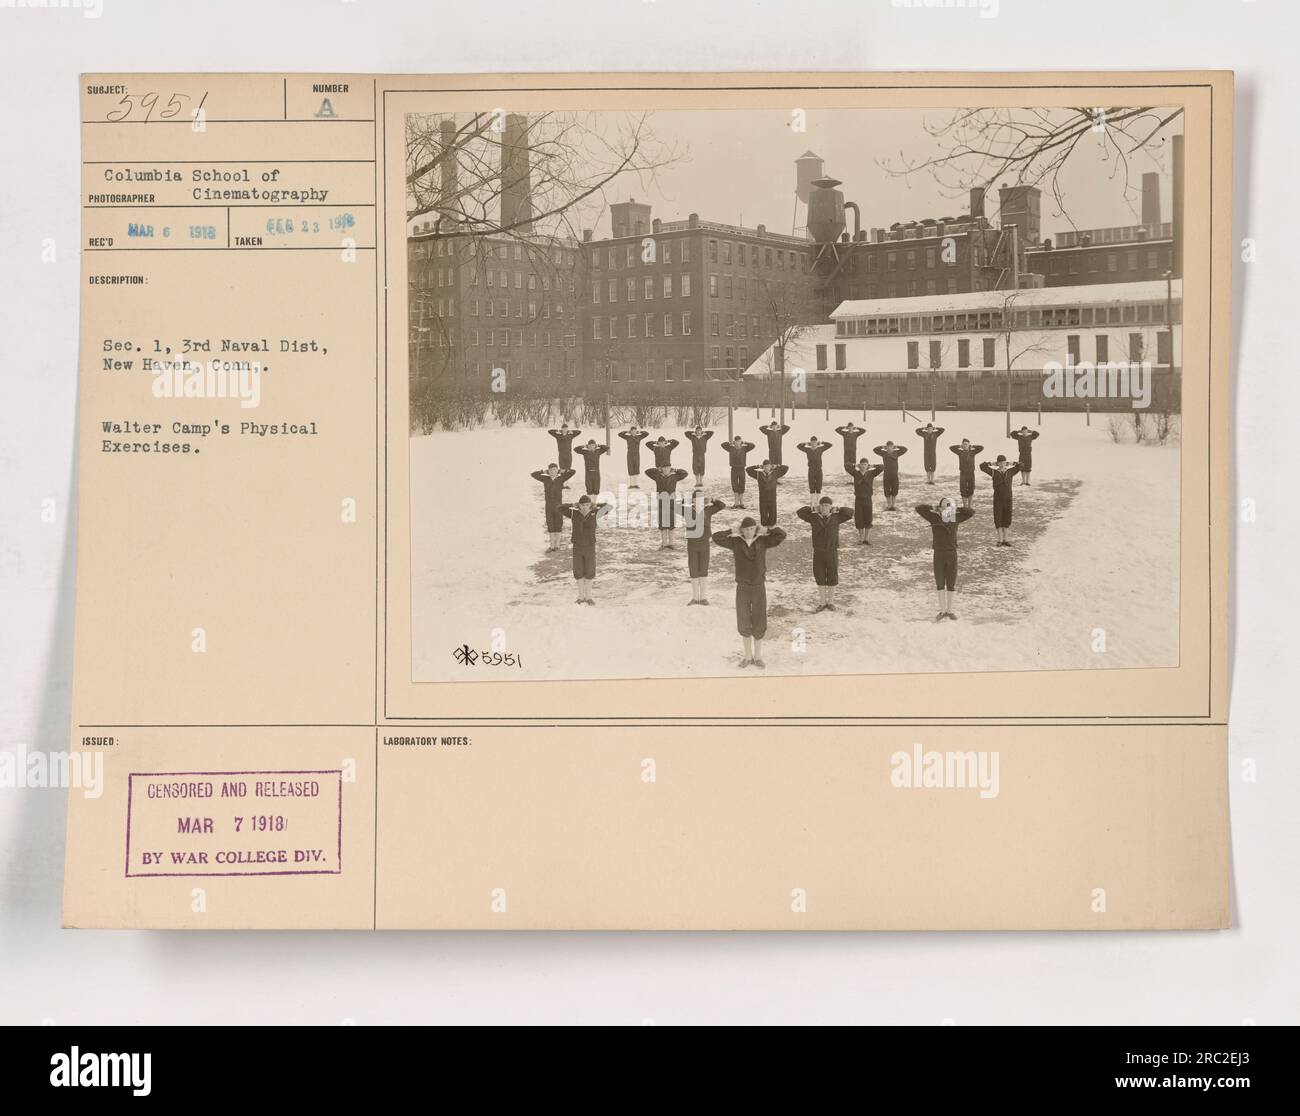 Group of soldiers participating in Walter Camp's physical exercises at Columbia School of Cinematography in New Haven, Connecticut. The picture was taken in March 1918, and it was censored and released by the War College Division on March 7, 1918. Stock Photo